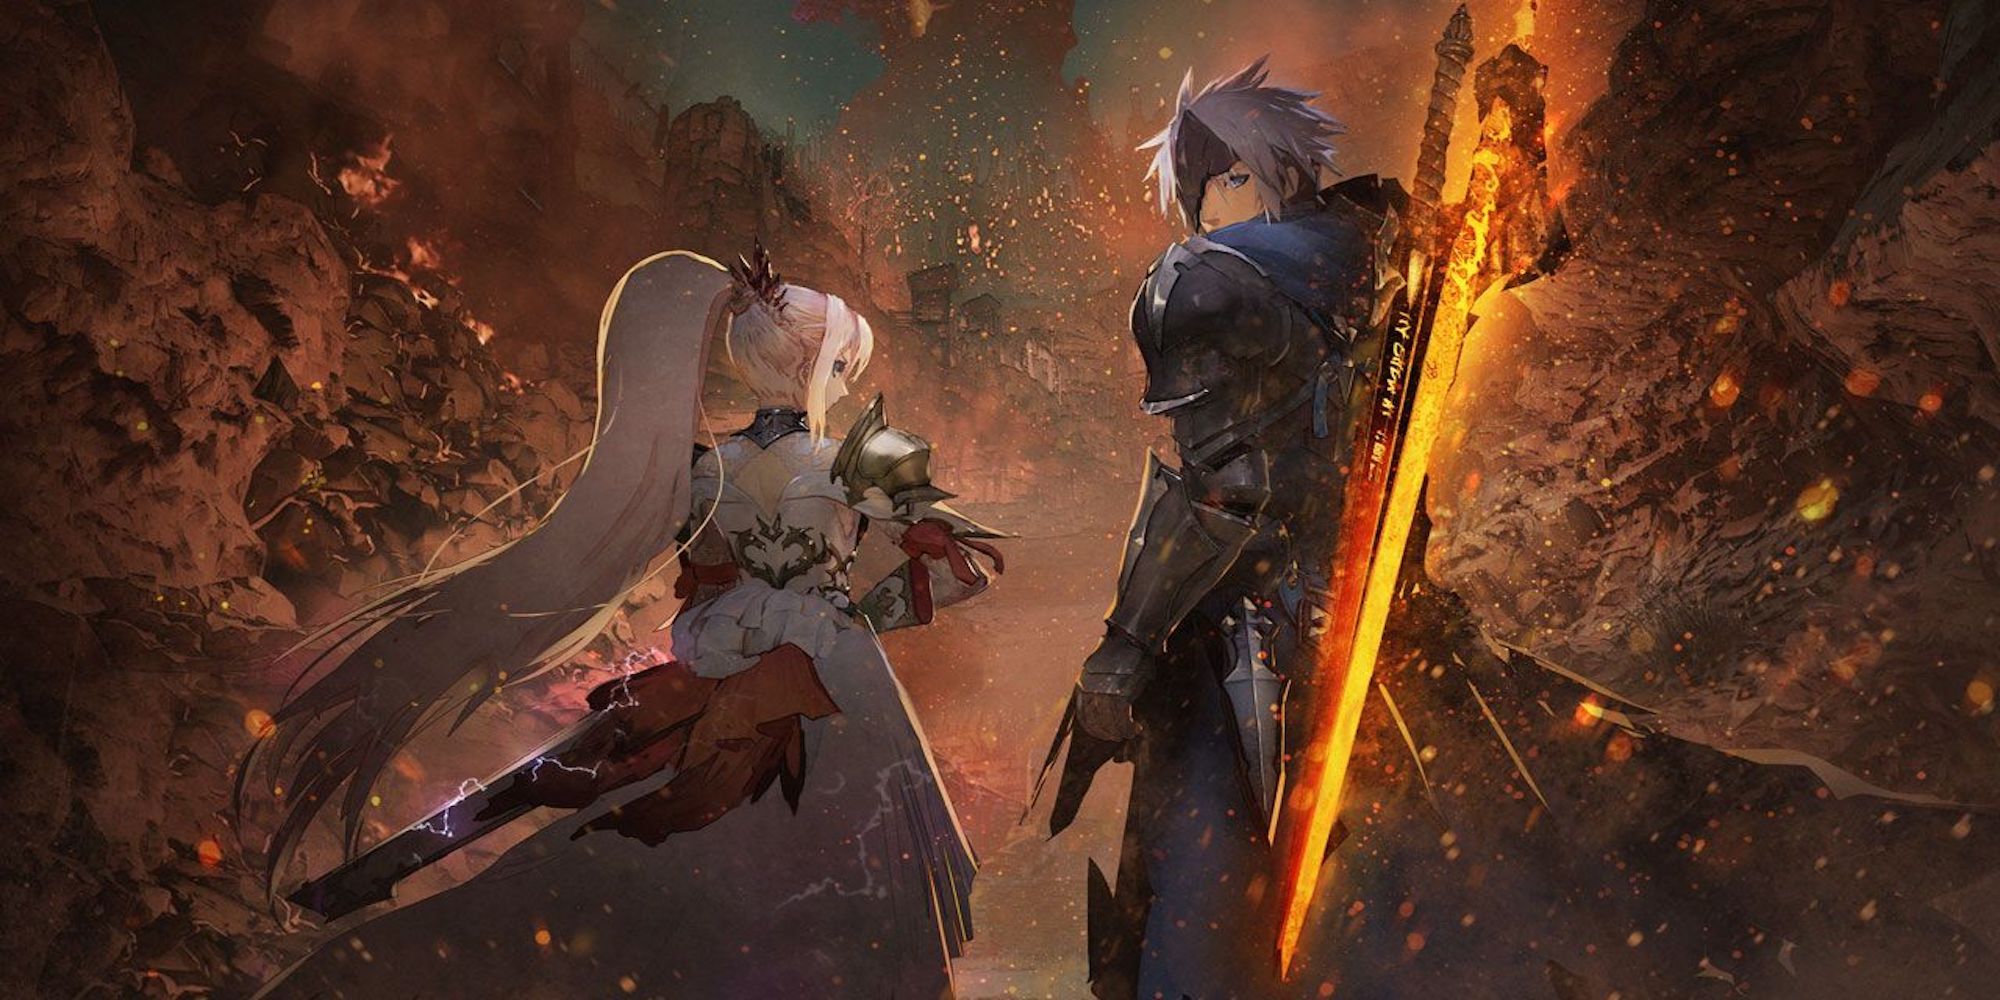 Official art for Tales of Arise